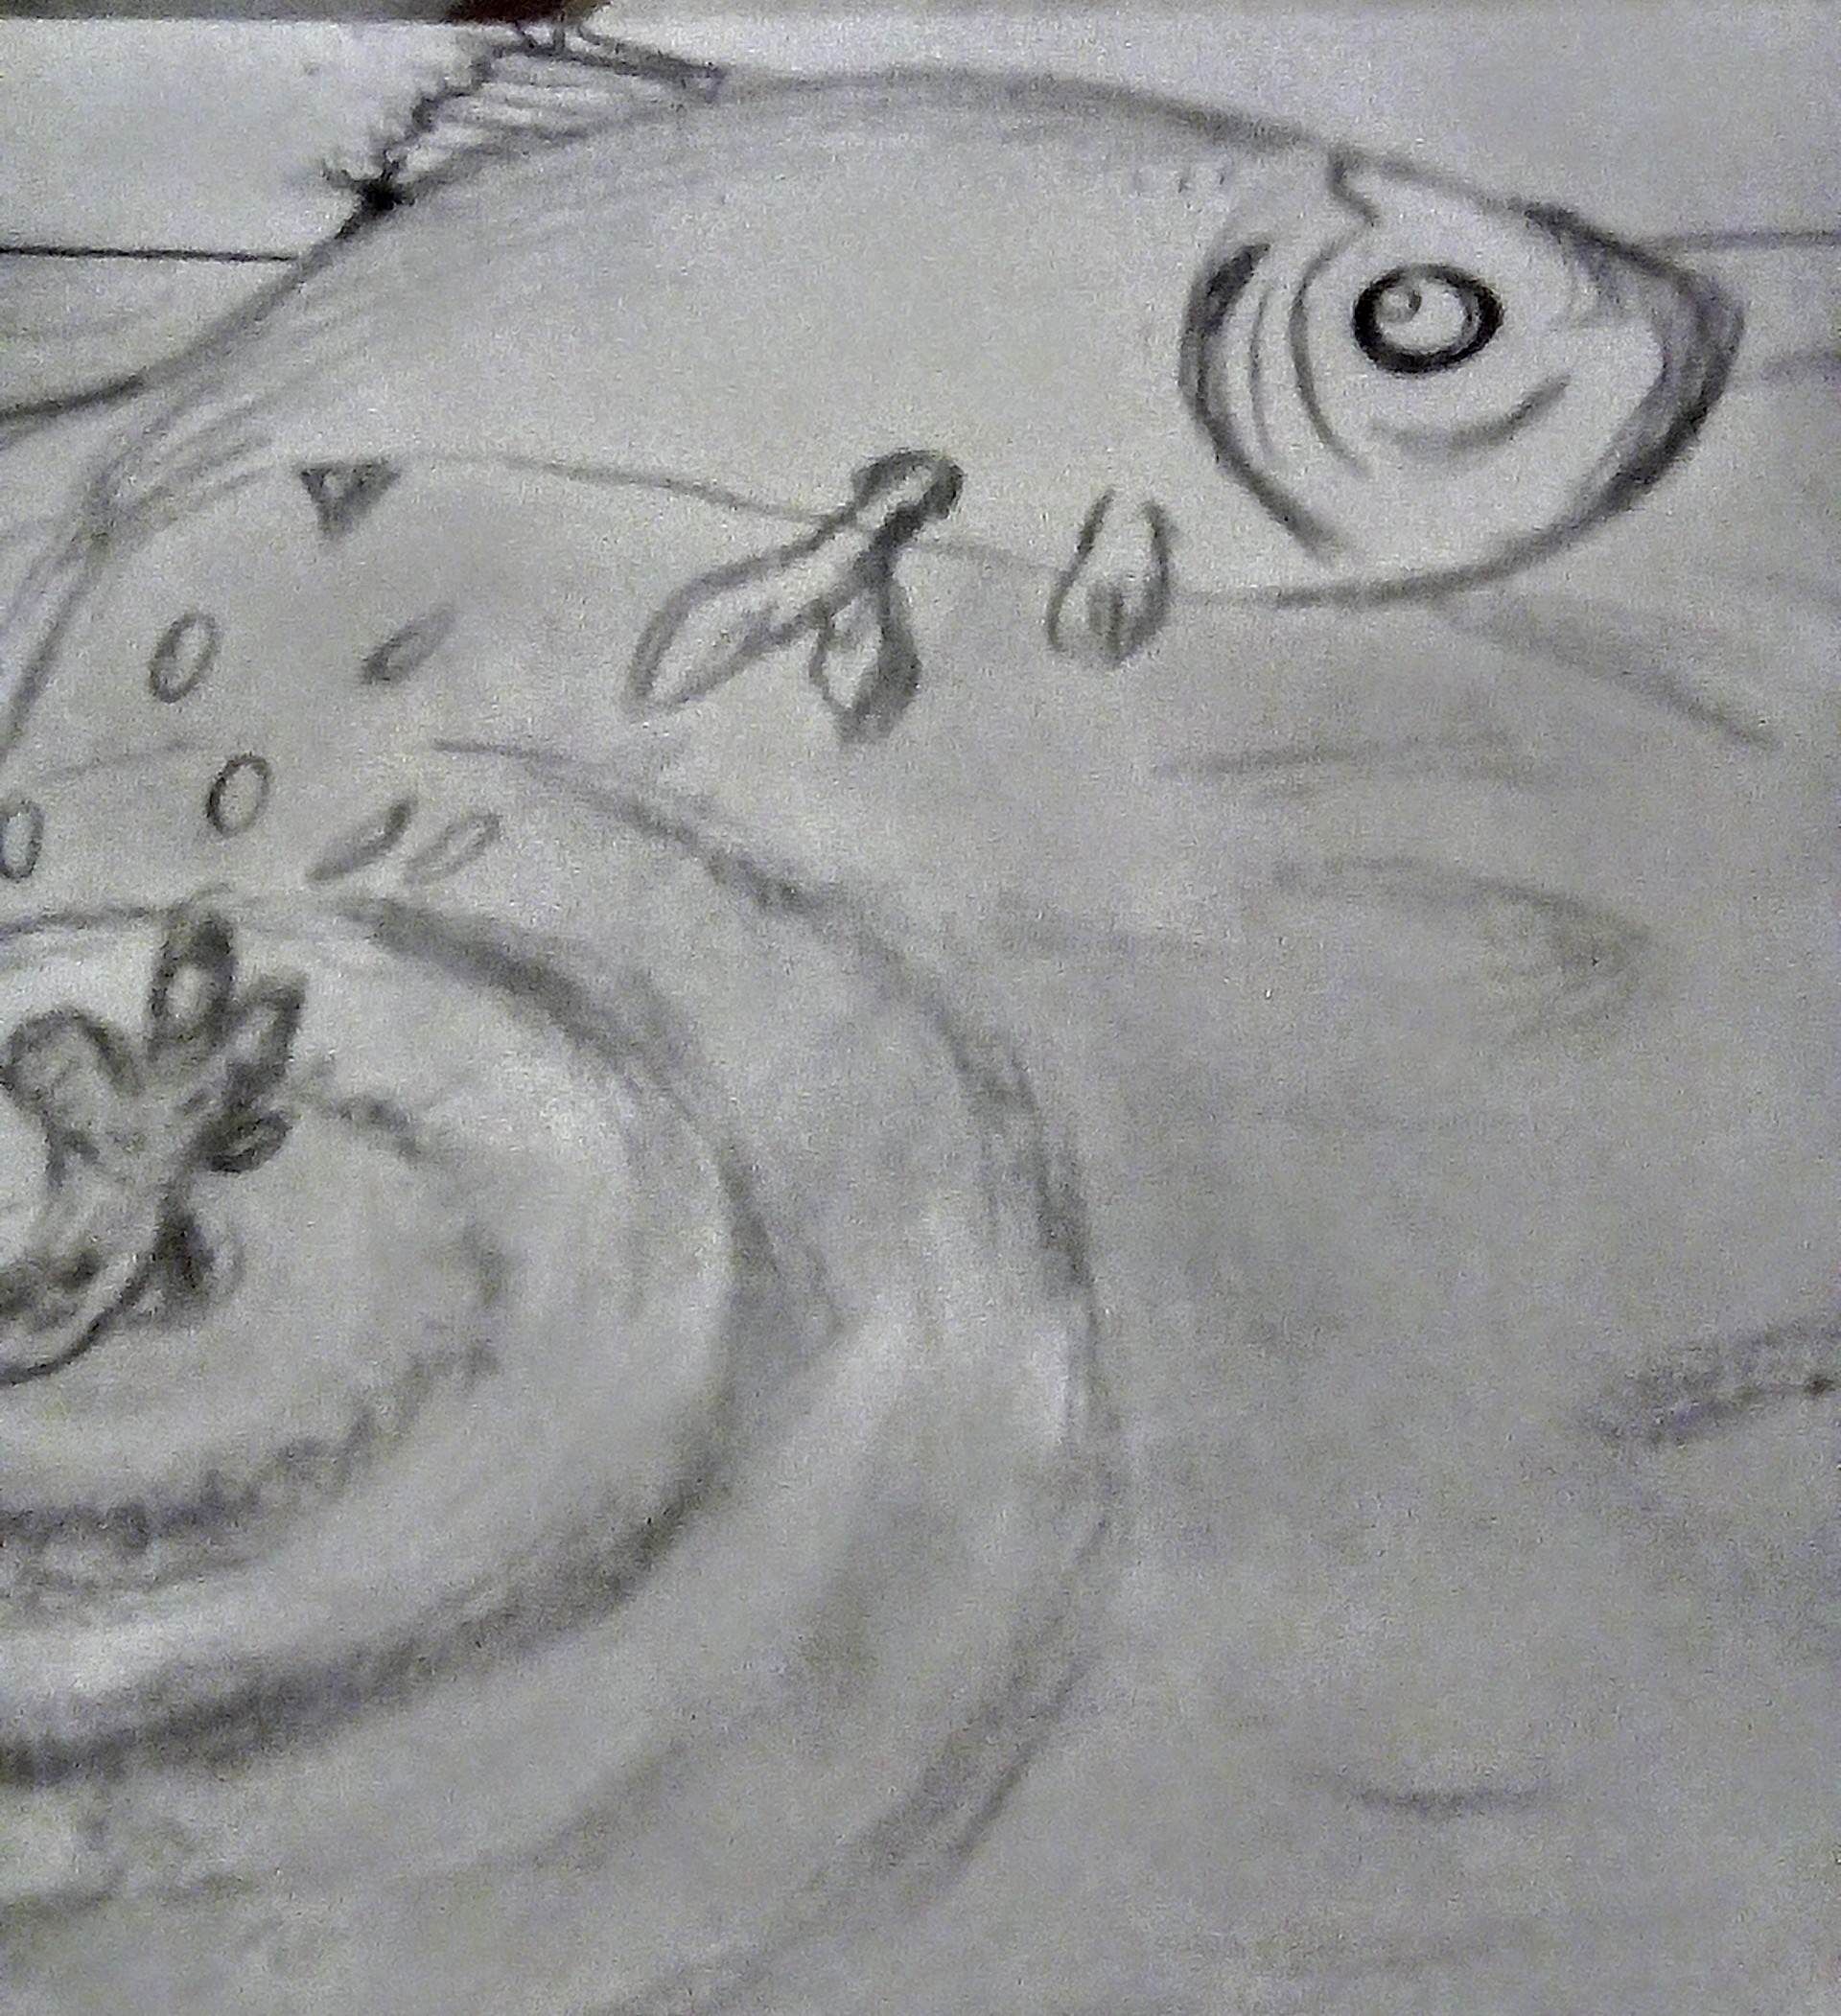 Fish jumping out of water, optical illusion (drawing) — Hive